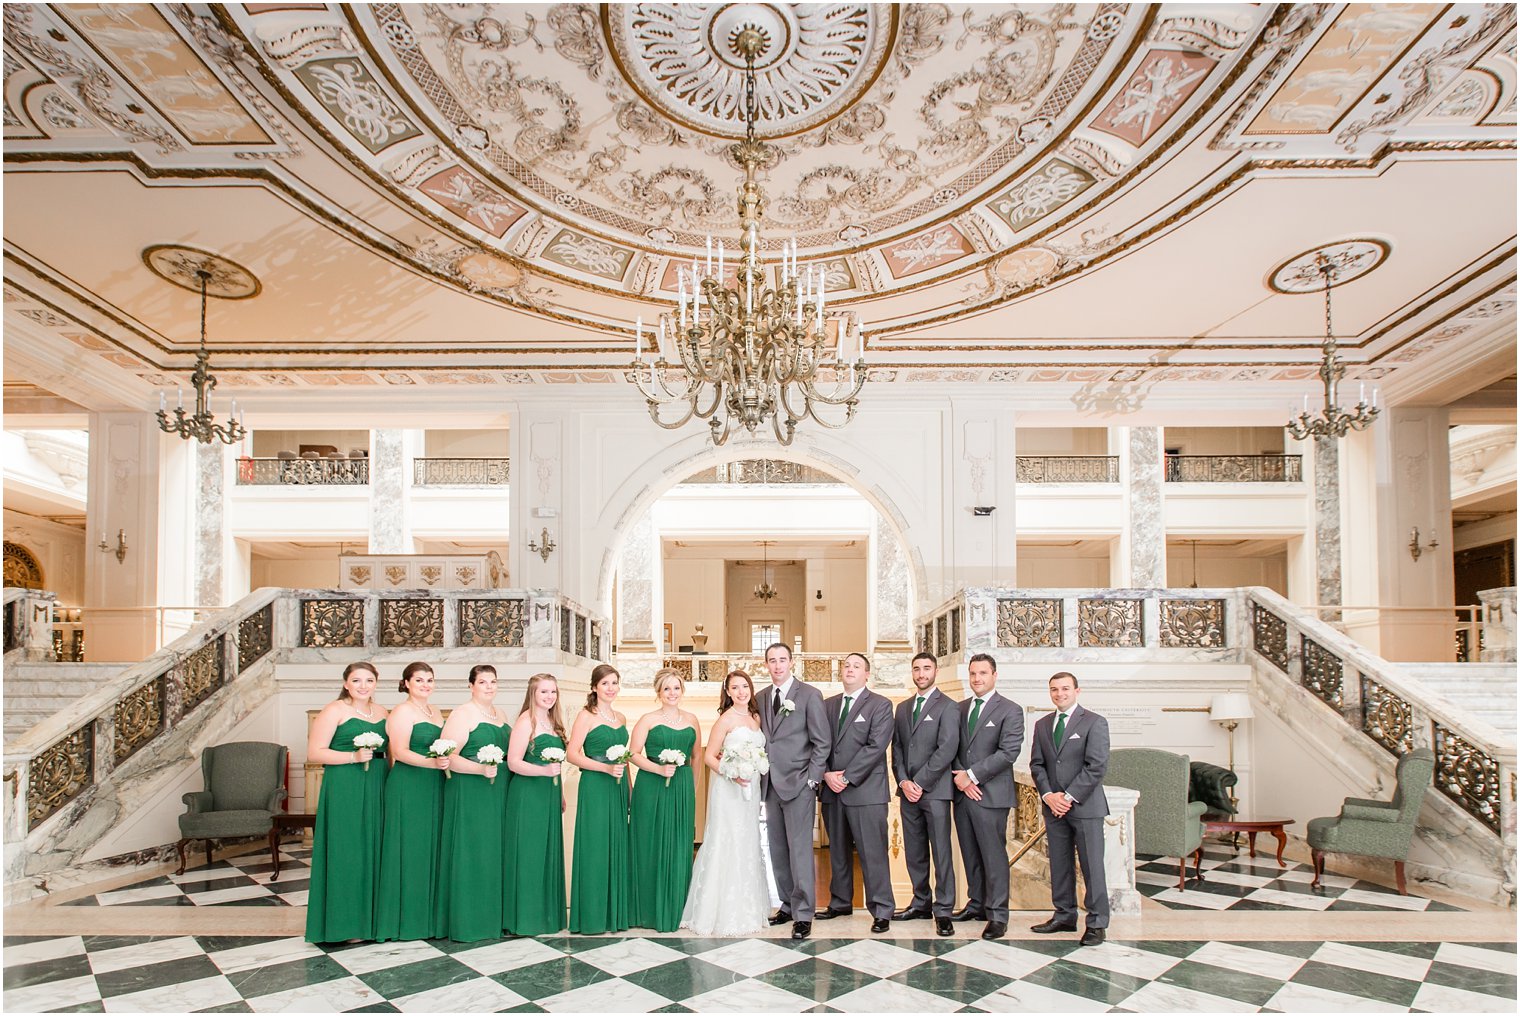 Bridal party in emerald green and gray